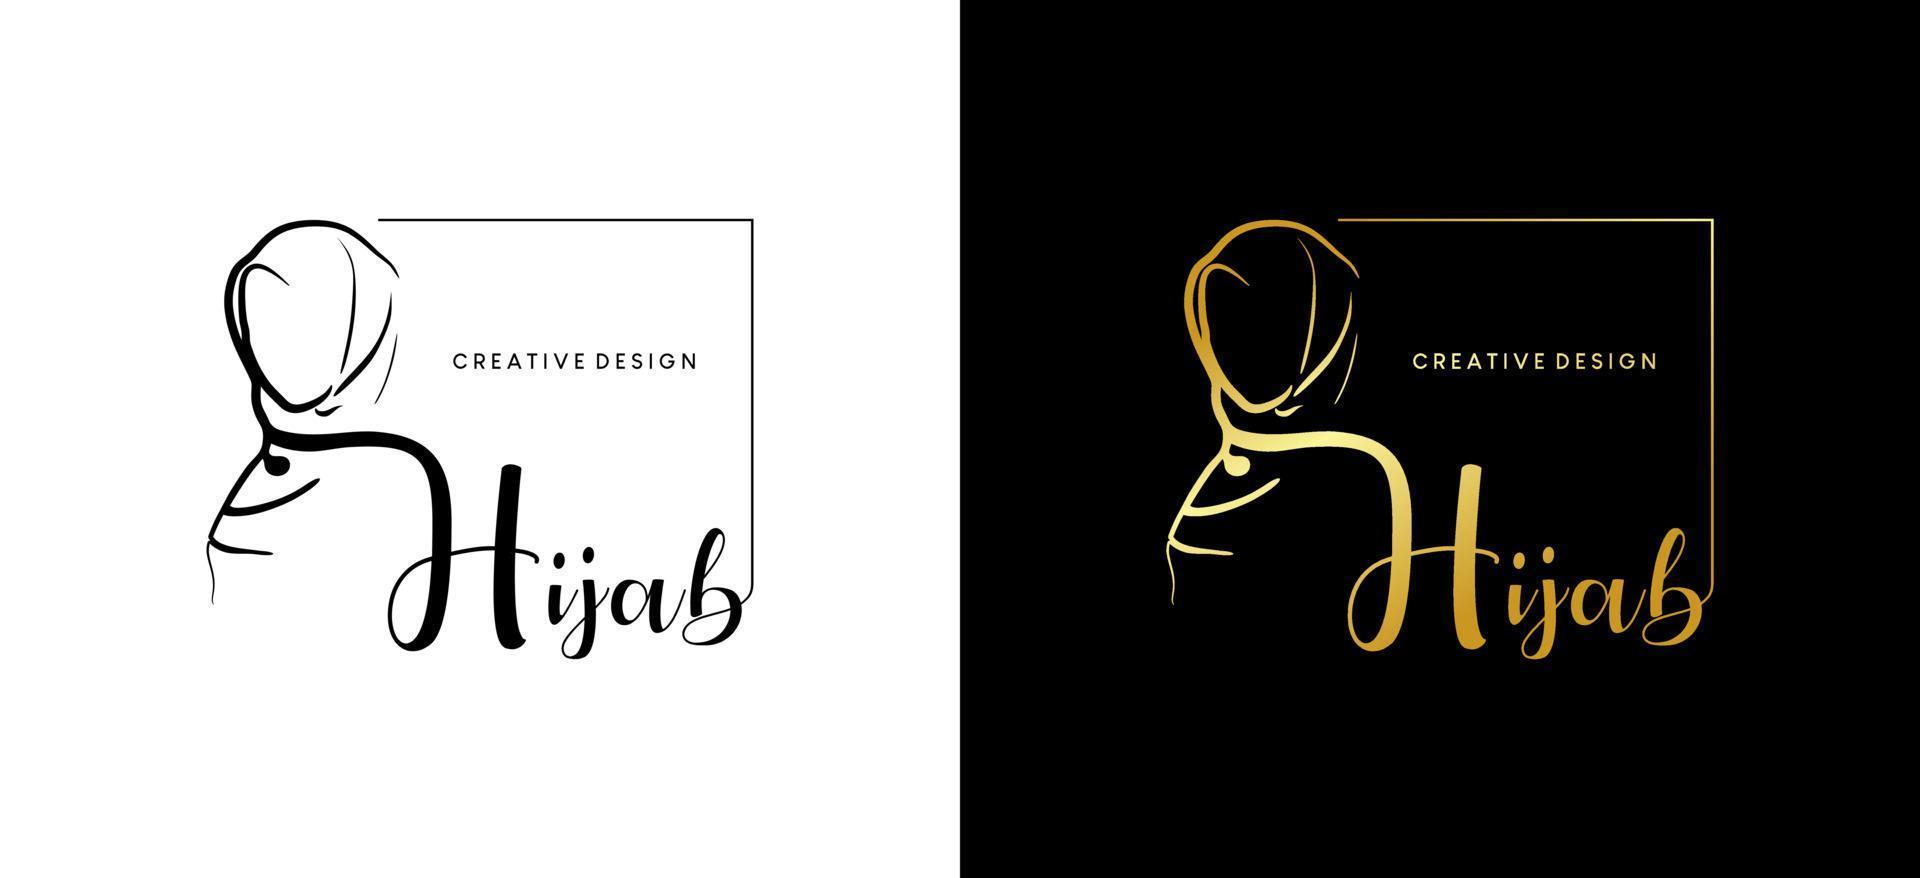 Muslimah hijab logo, boutique, beauty veil fashion with luxury style vector